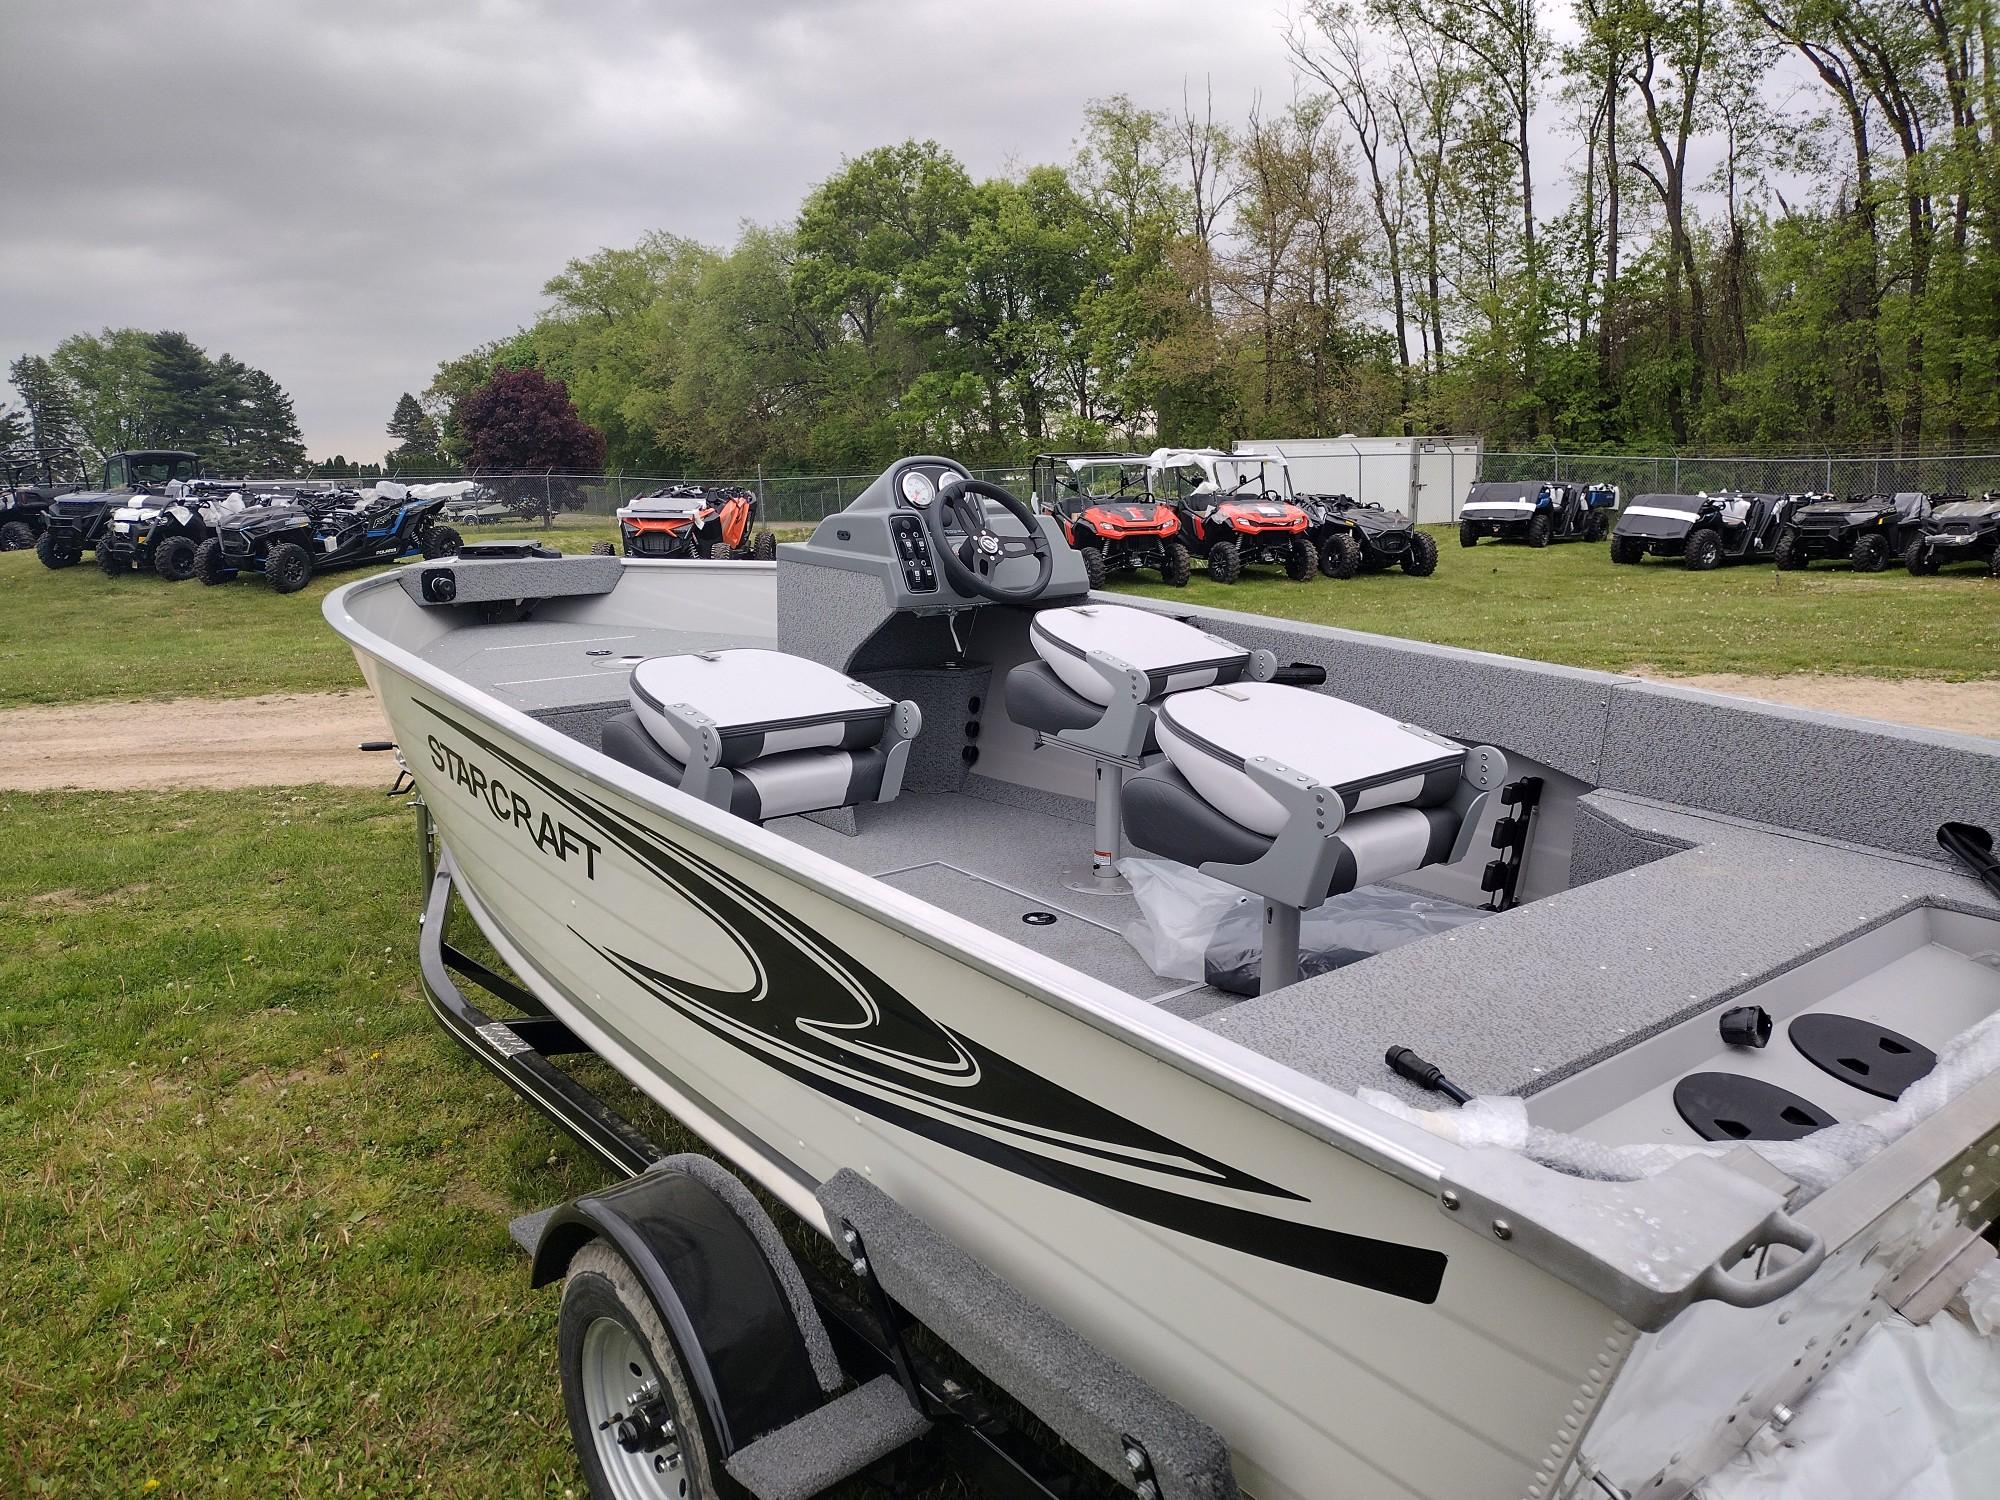 Explore Starcraft 16 Sc Boats For Sale - Boat Trader